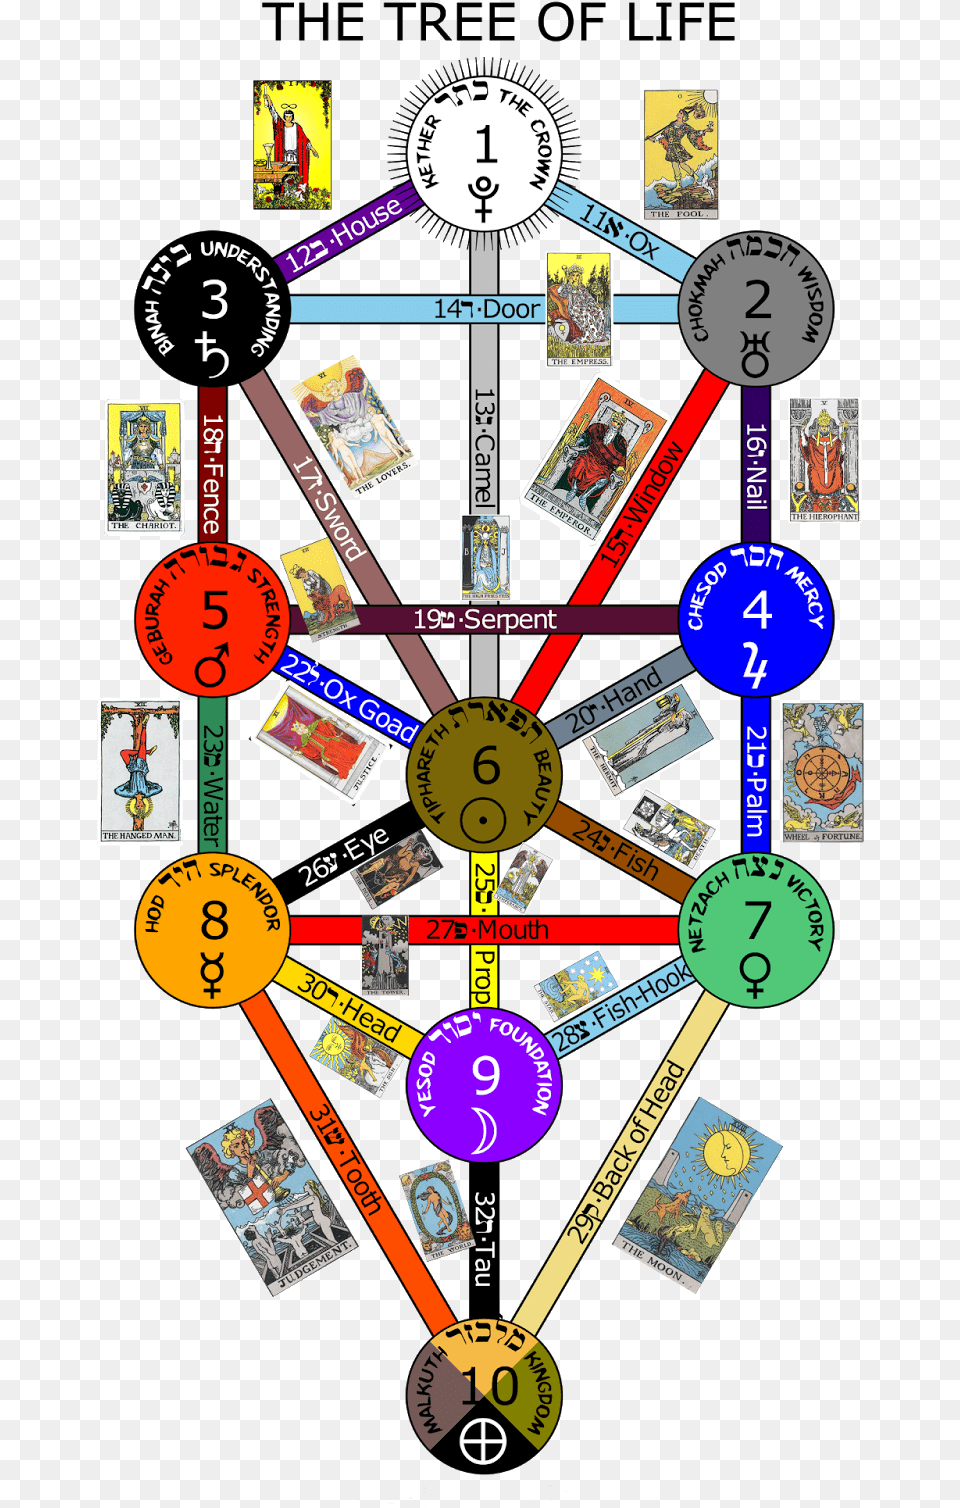 I Am A Fool Tom Iu0027ve No Doubt About That Tarot Cards Kabbalah Tree Of Life Poster, Person, Book, Publication Png Image